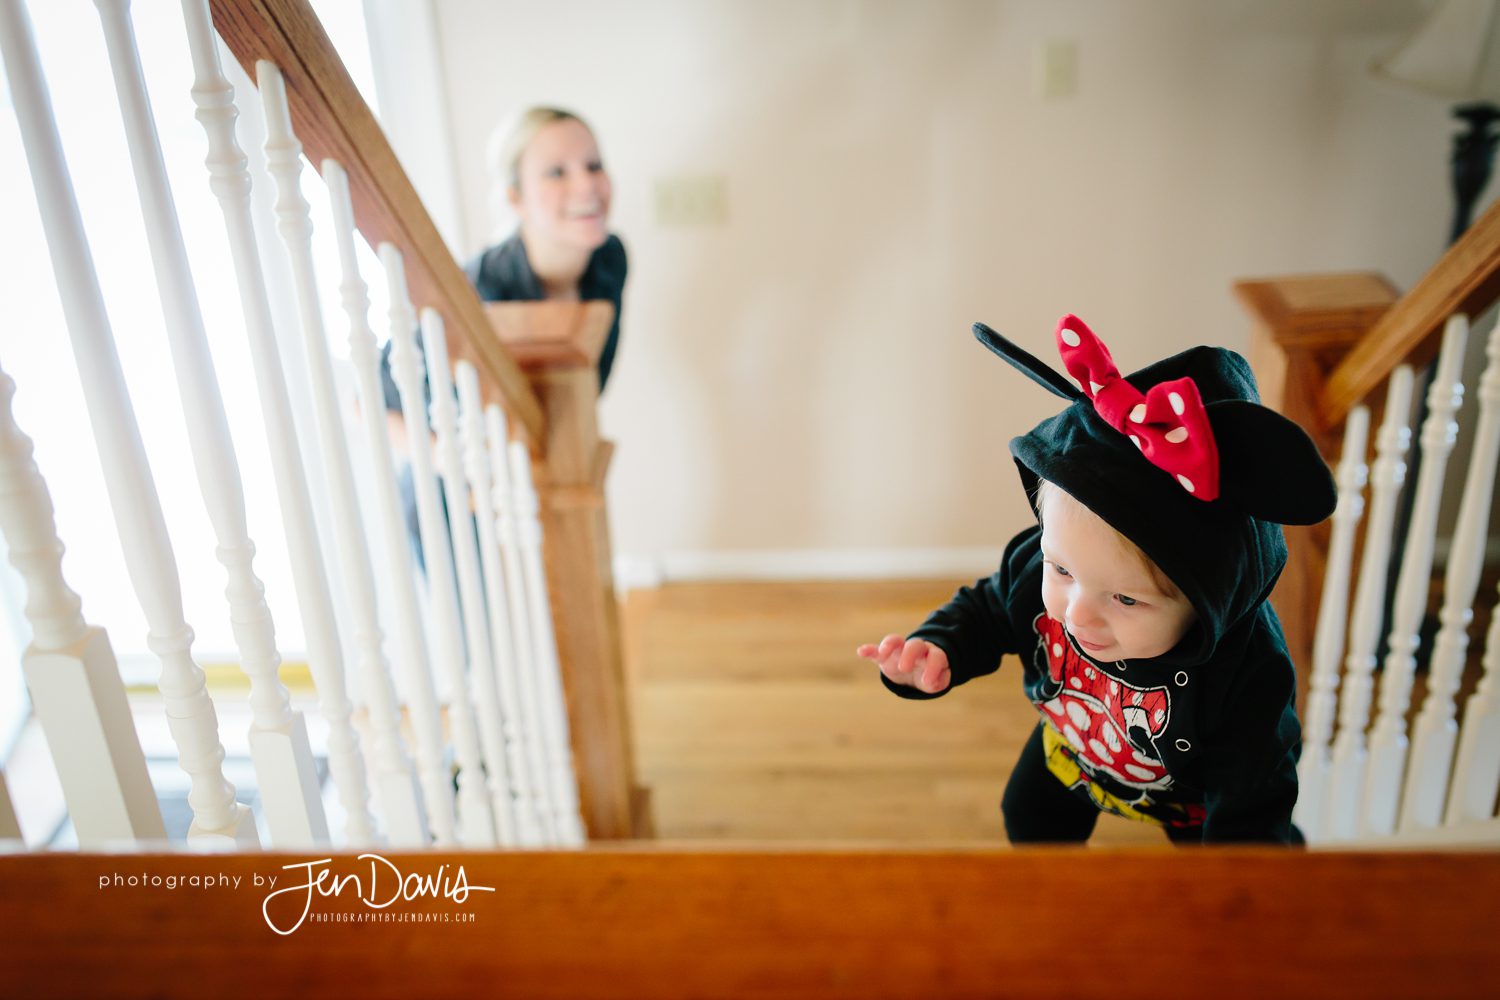 One Year Old Climbing steps with minnie mouse sweatshirt